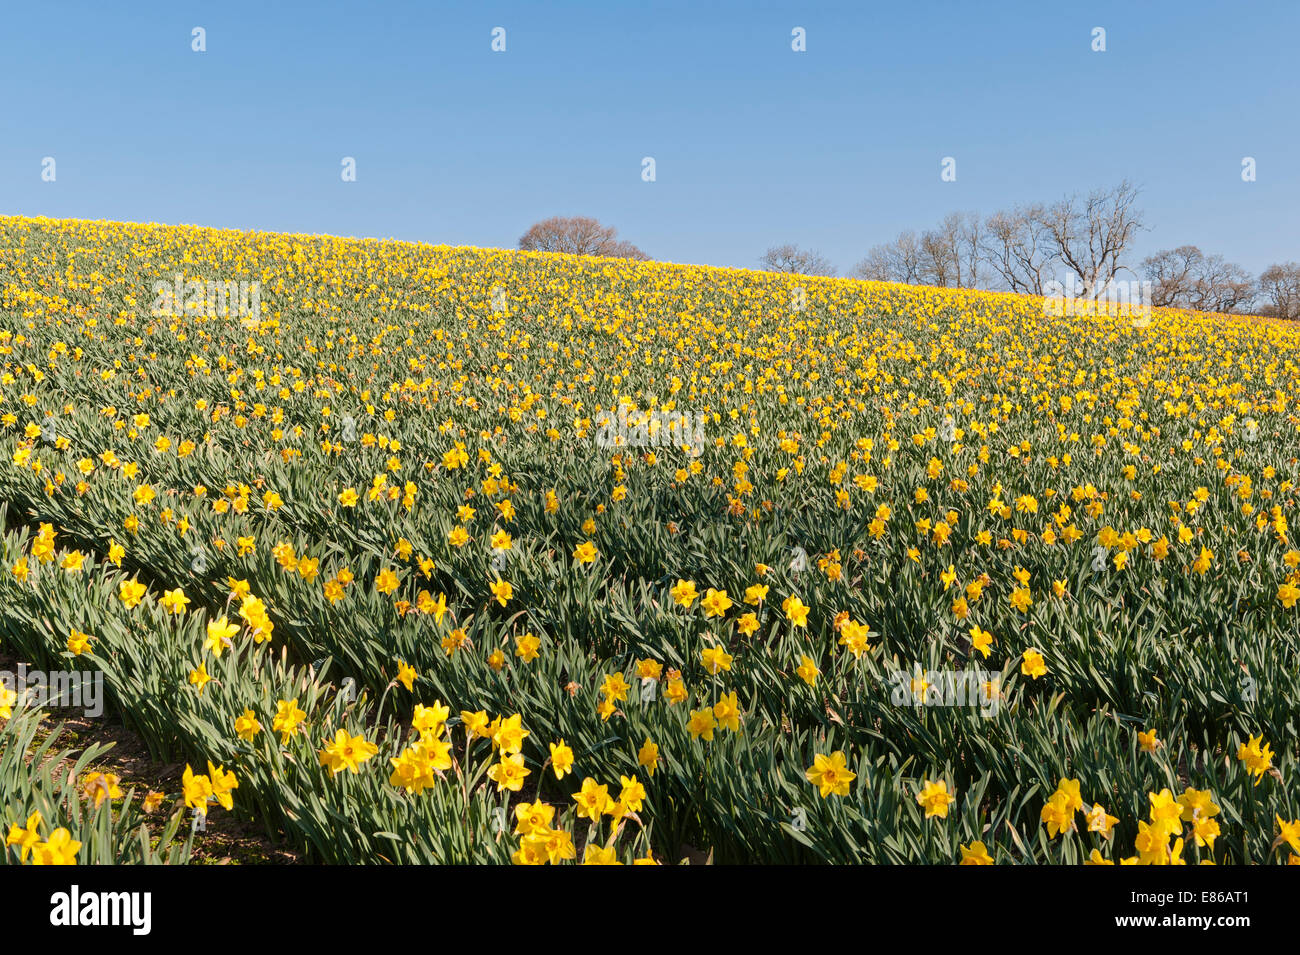 A field of daffodils grown commercially in Cornwall, UK, in springtime Stock Photo